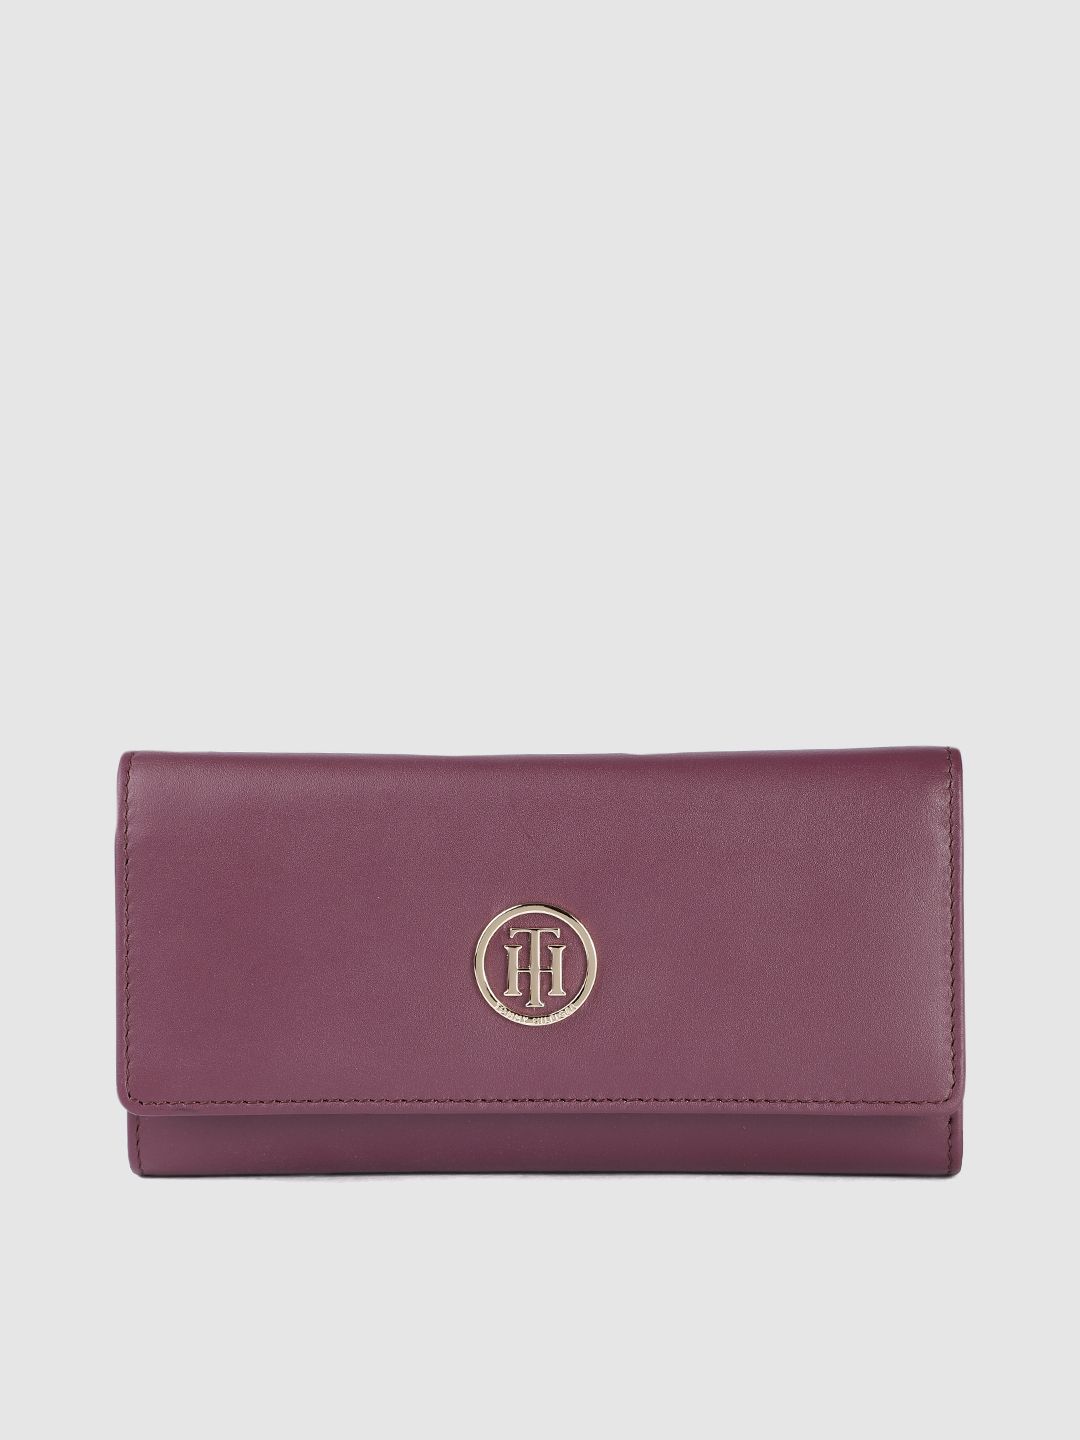 Tommy Hilfiger Women Purple Leather Envelope Price in India